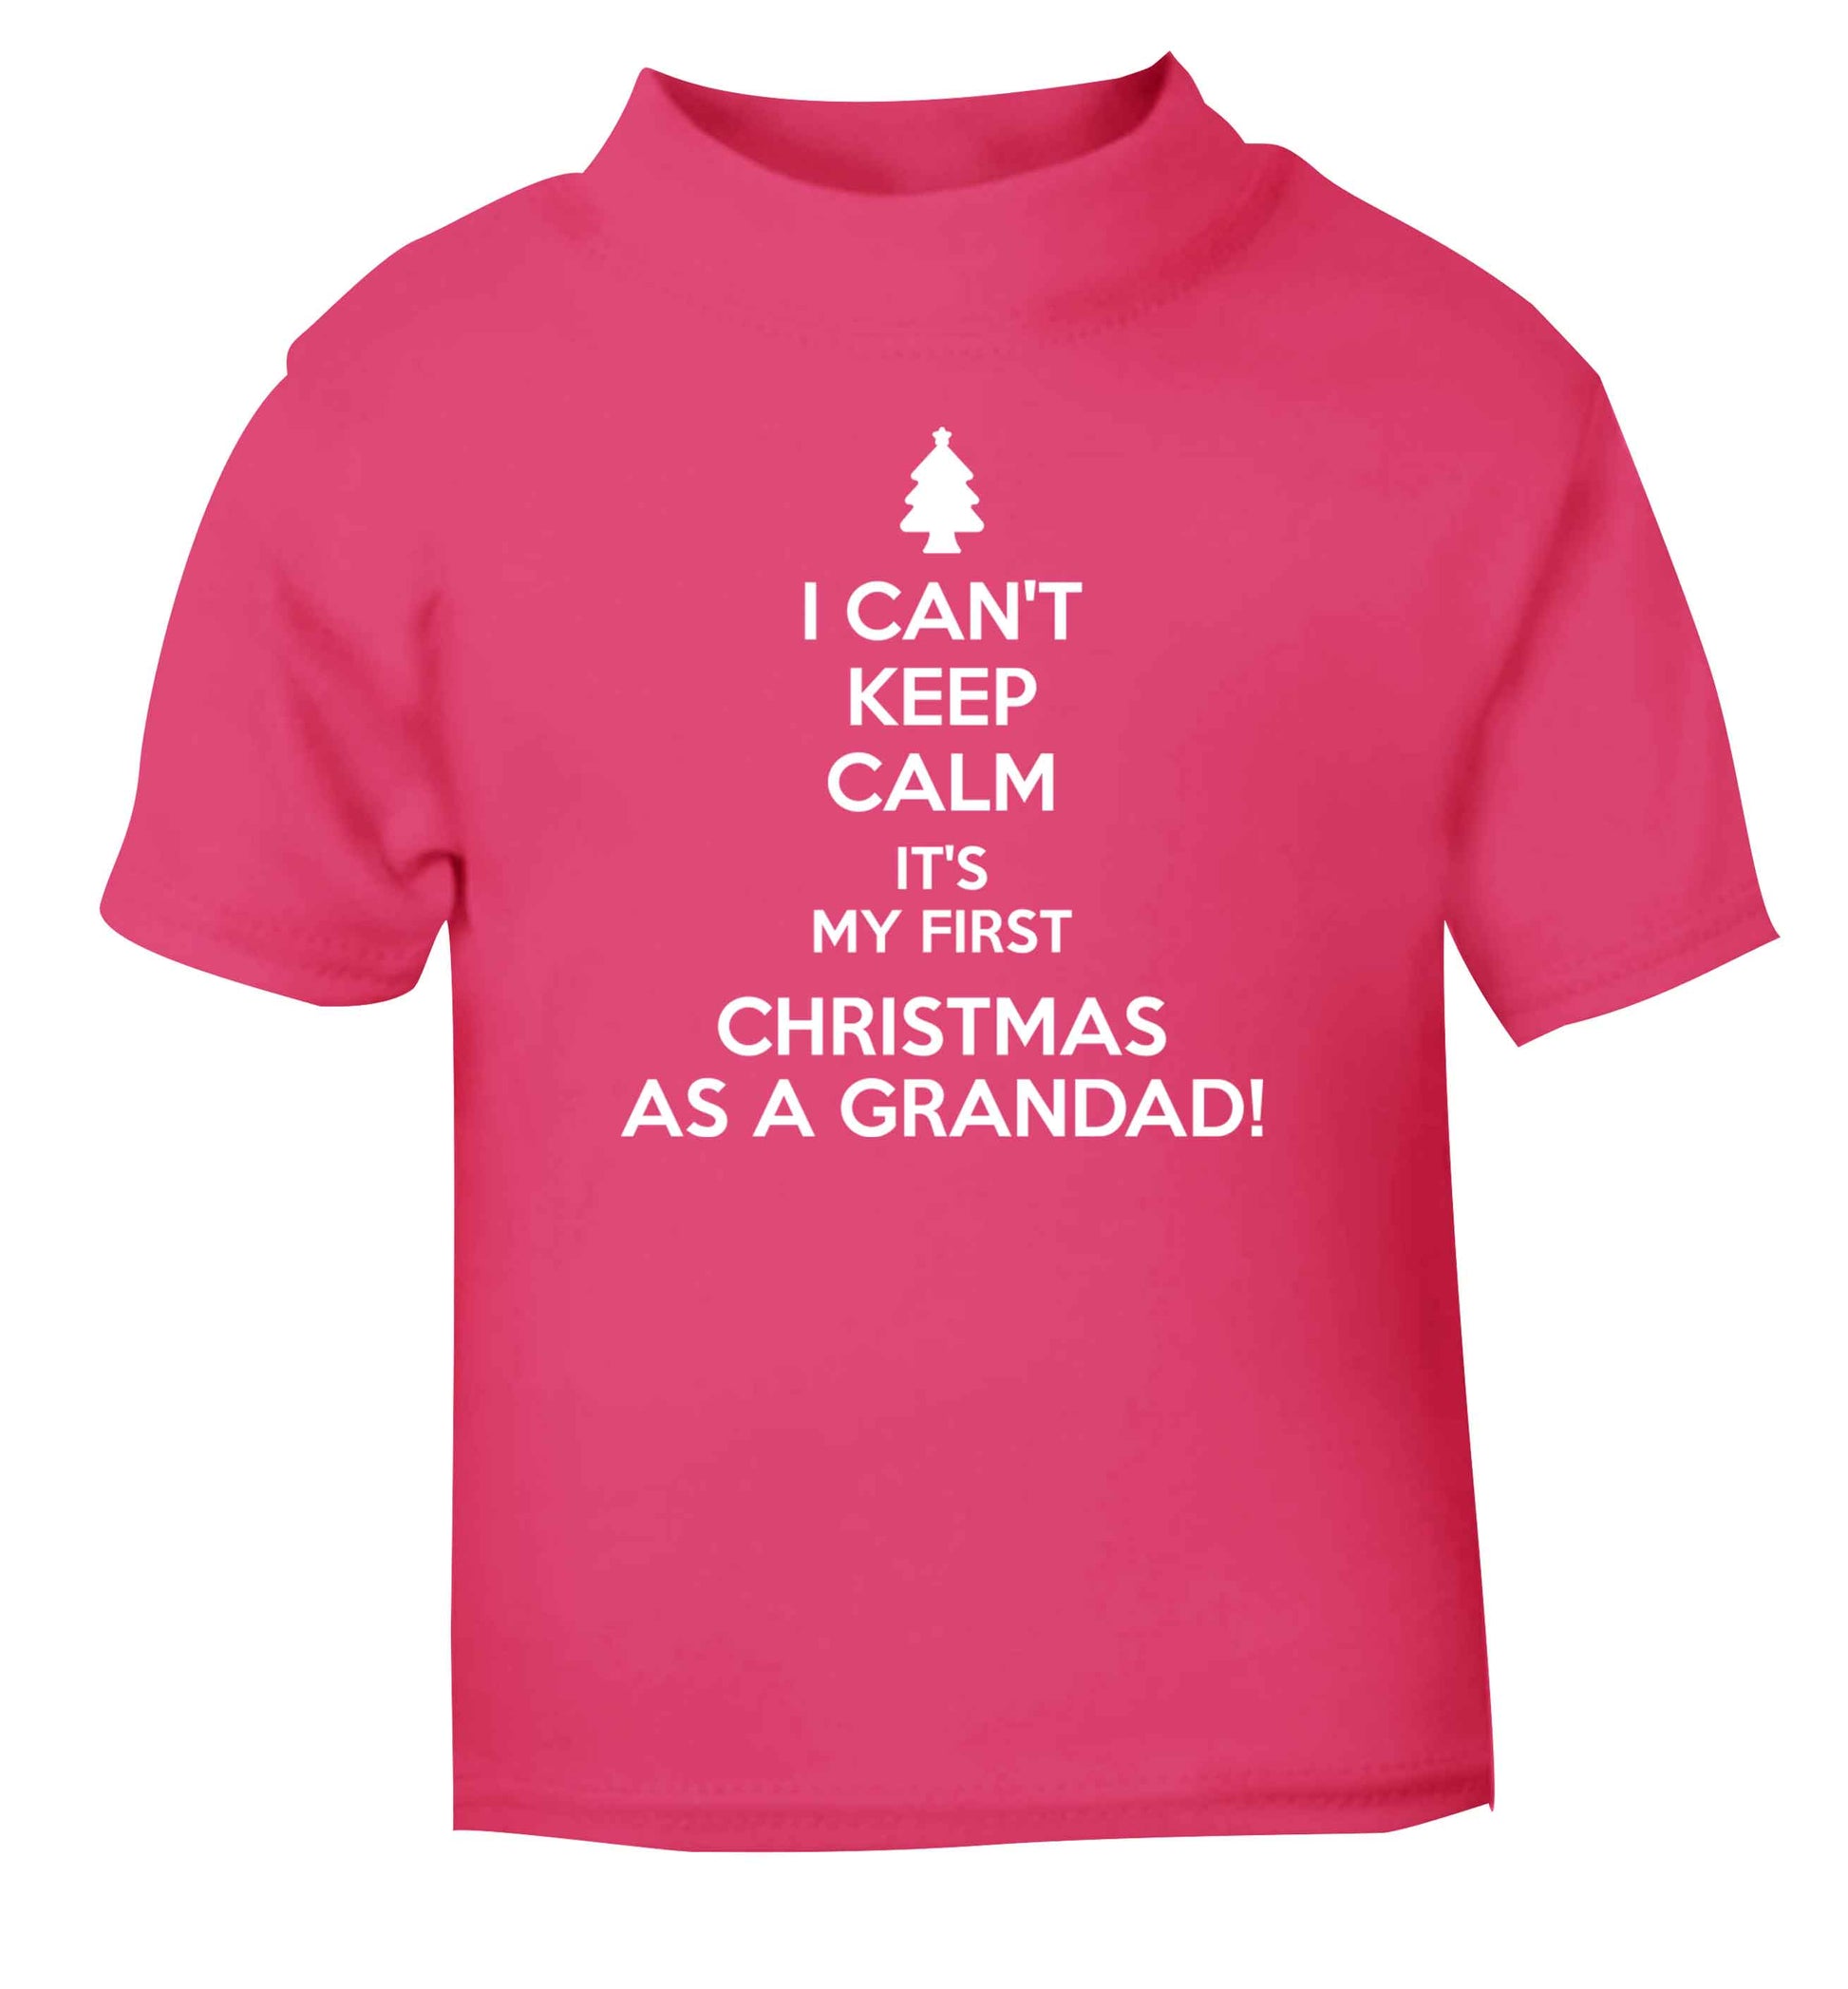 I can't keep calm it's my first Christmas as a grandad! pink Baby Toddler Tshirt 2 Years